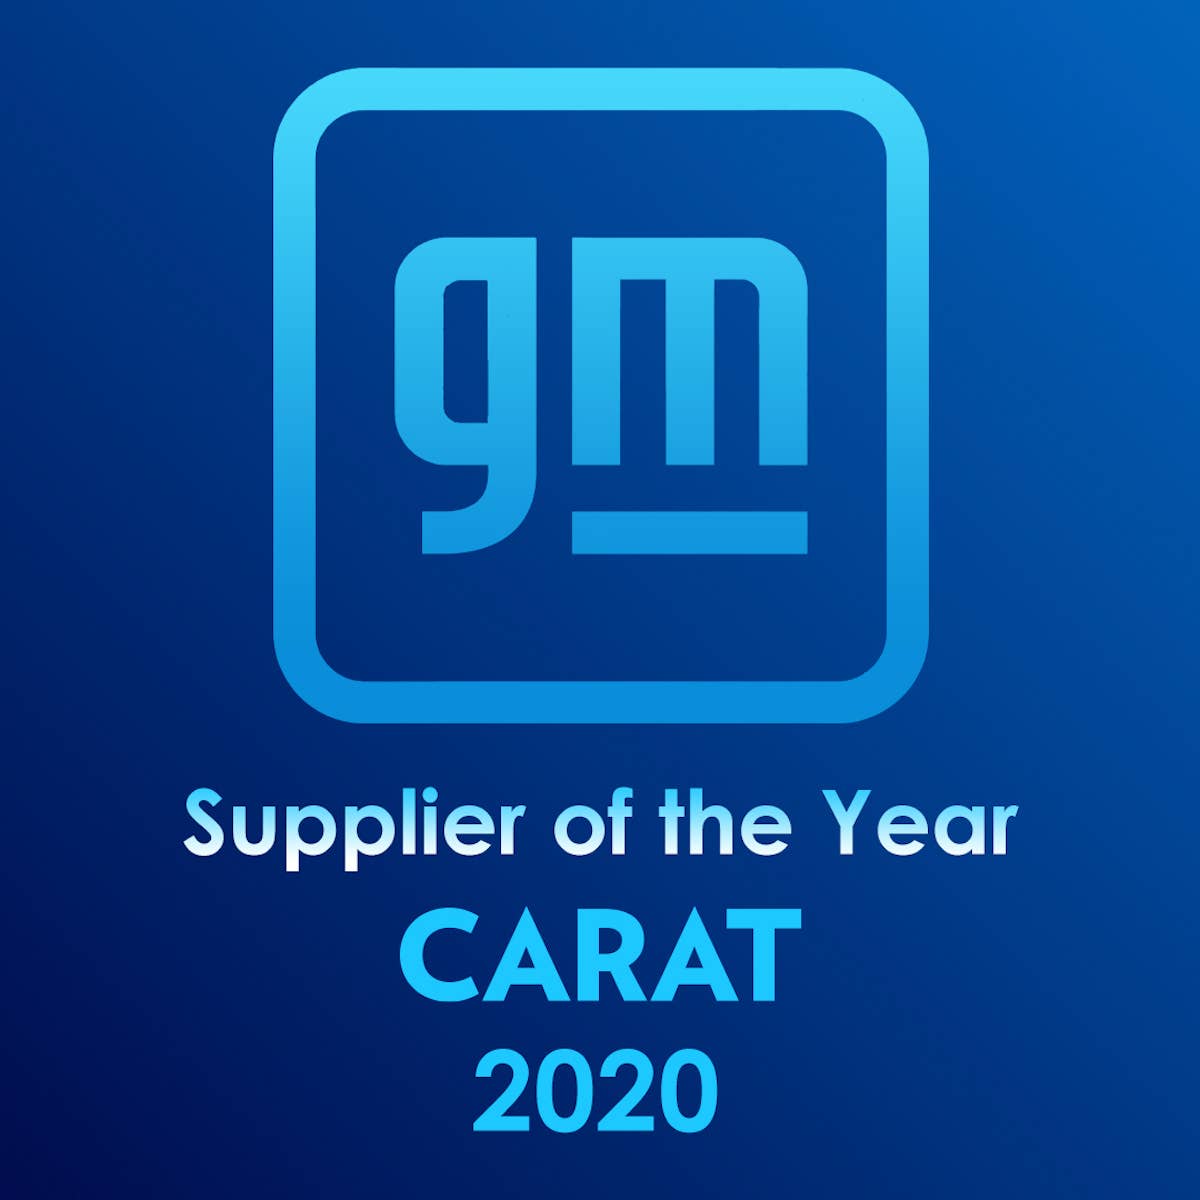 Carat Named a 2020 Supplier of the Year Winner by General Motors